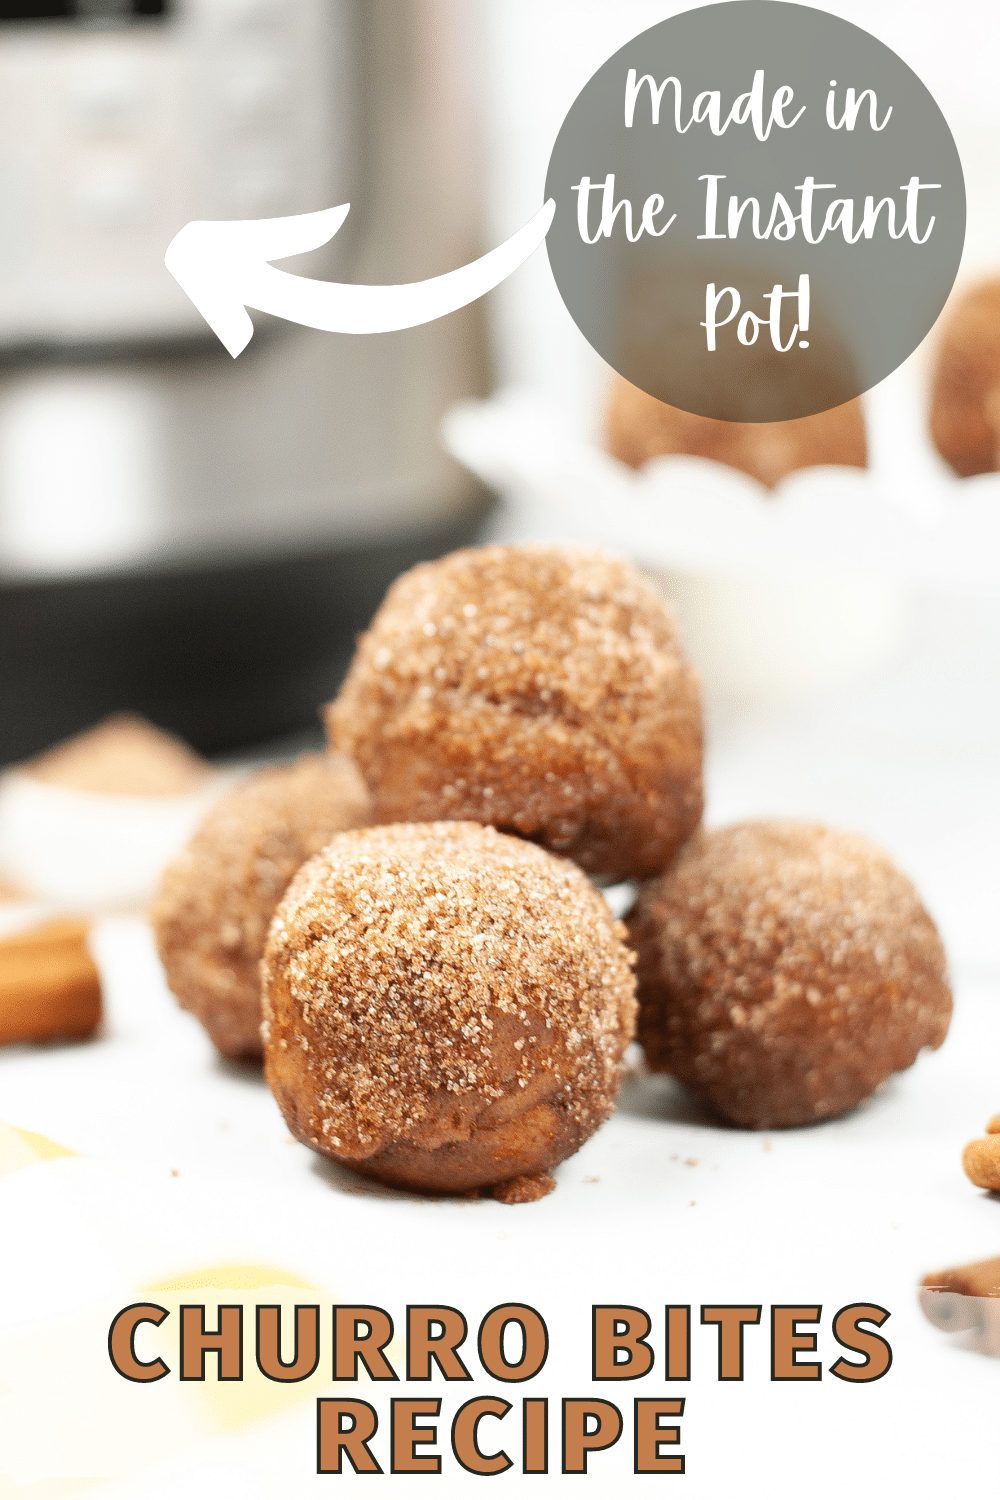 Instant Pot Churro Bites are quick and easy to make, perfect for a sweet snack or dessert. The cinnamon sugar on the outside is irresistible! #instantpot #pressurecooker #churrobites #cinnamonsugar #recipe via @wondermomwannab